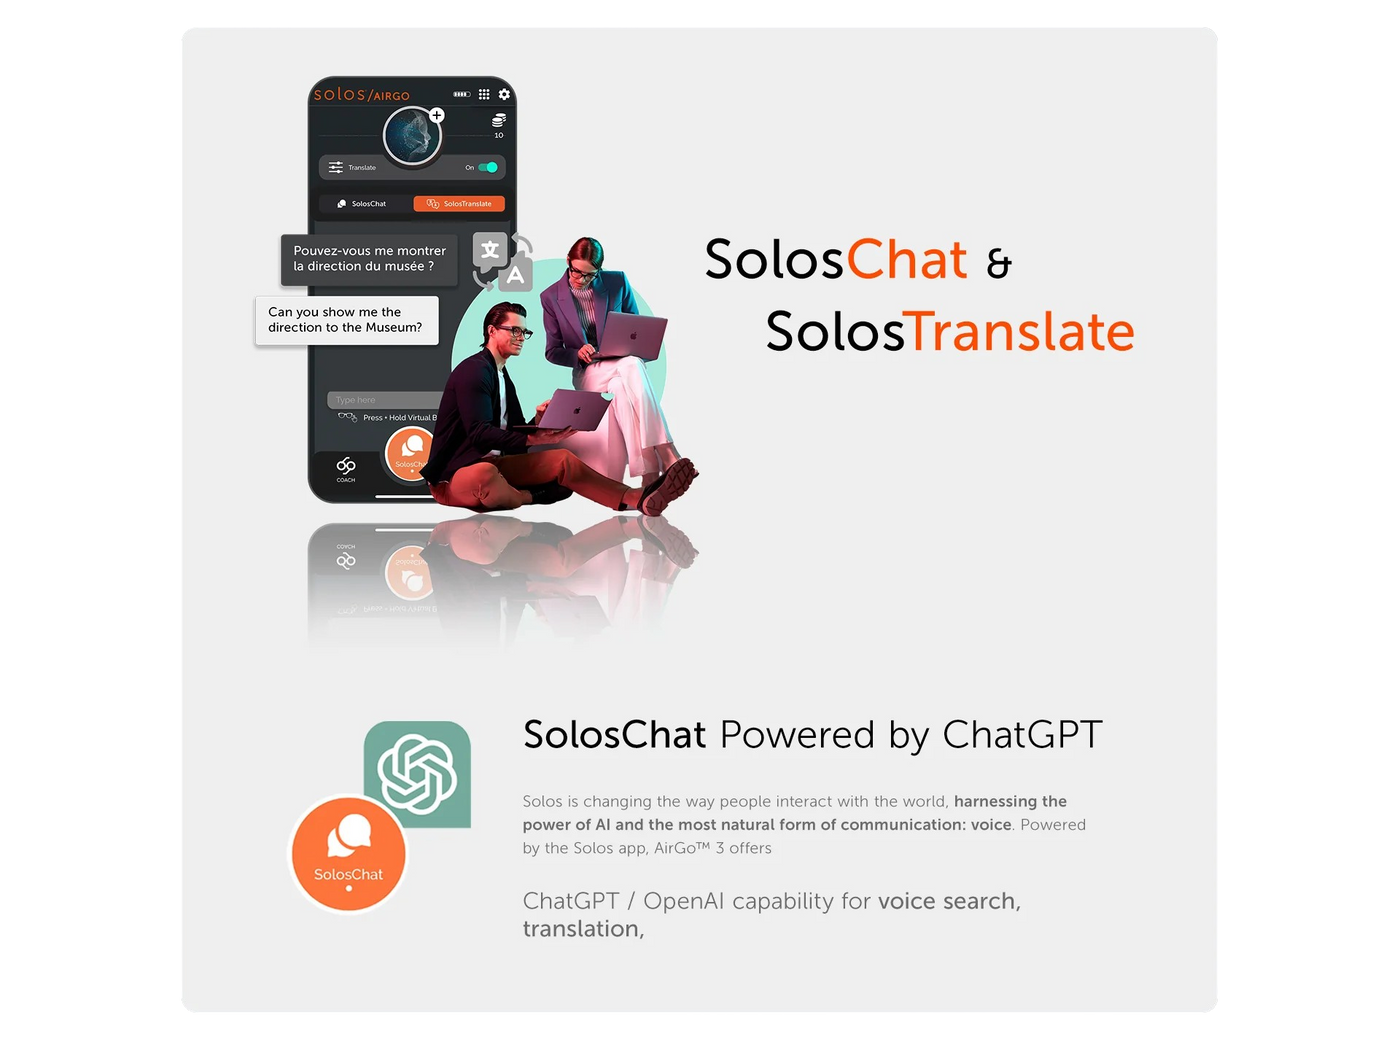 front_page_solos_chat_and_solos_translation-removebg.png__PID:5190b4ad-cb7c-4928-851b-e7ac1927e45b